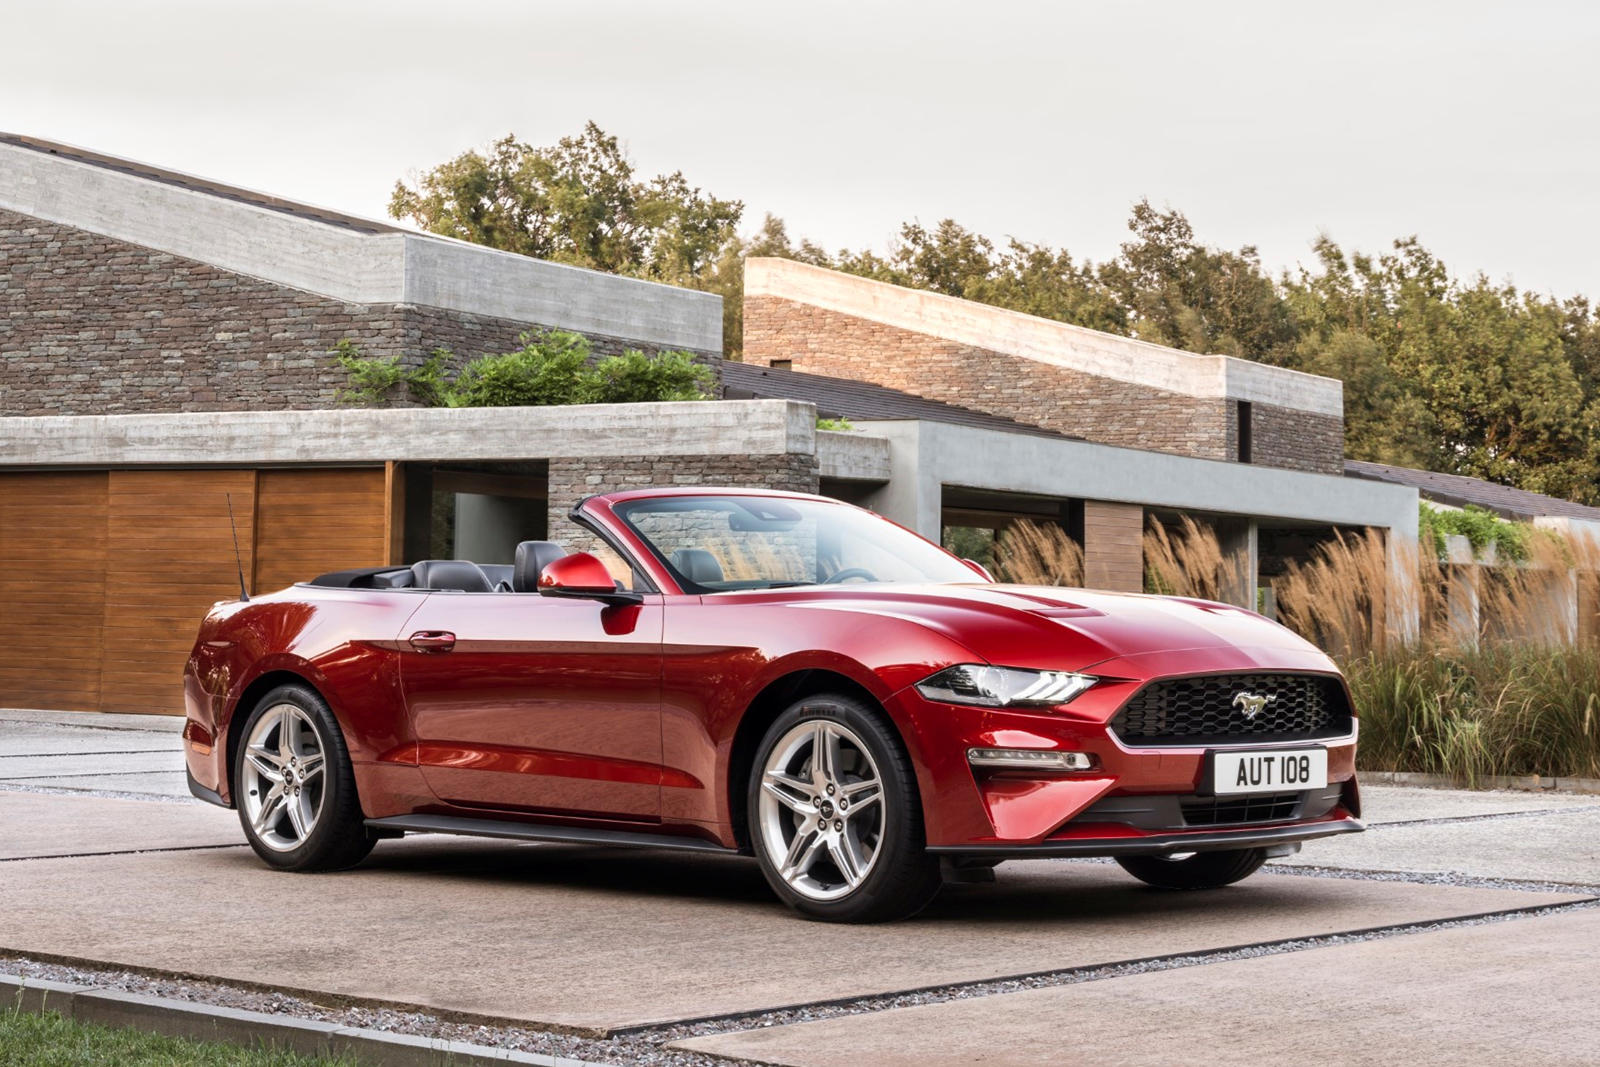 2020 Ford Mustang Gt Convertible Specs